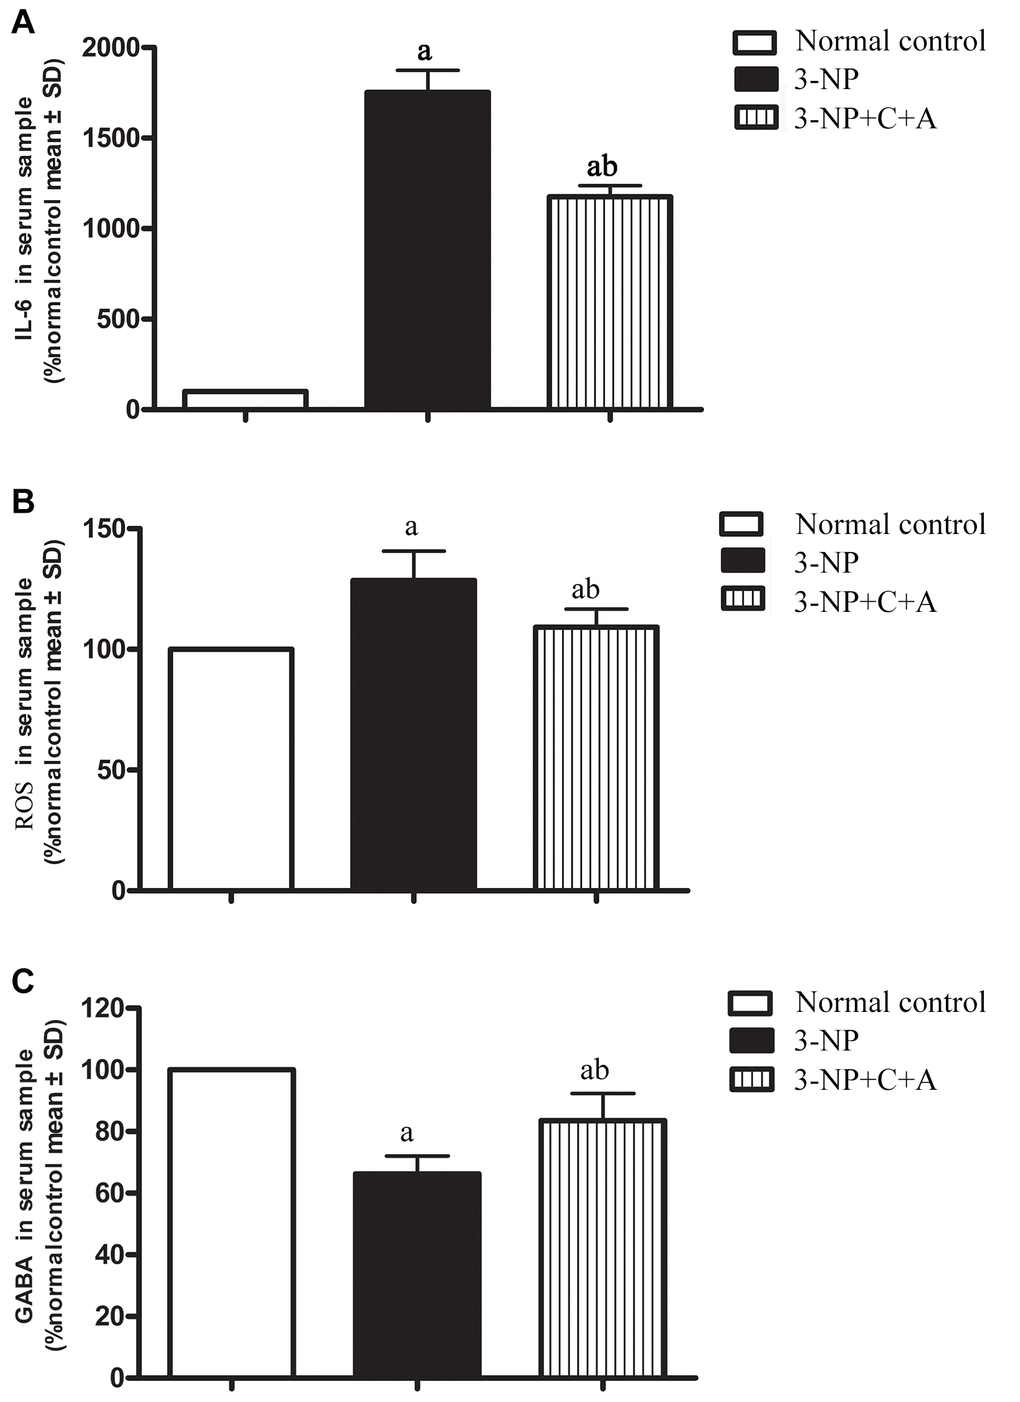 ELISA analysis of inflammatory cytokines (A) IL-6 and (B) ROS, as well as the inhibitory neurotransmitter. (A, B) The 3-NP+C16+Ang-1 group showed decreased IL-6 and ROS levels, suggesting that C16+Ang-1 could prevent 3-NP-induced inflammation. (C) GABA levels in serum samples of the control, 3-NP, and 3-NP+C16+Ang-1 groups. Suppression of inflammatory factors and increased GABA level could protect neurons that have been damaged by oxidative stress and excitatory toxin. aP bP 